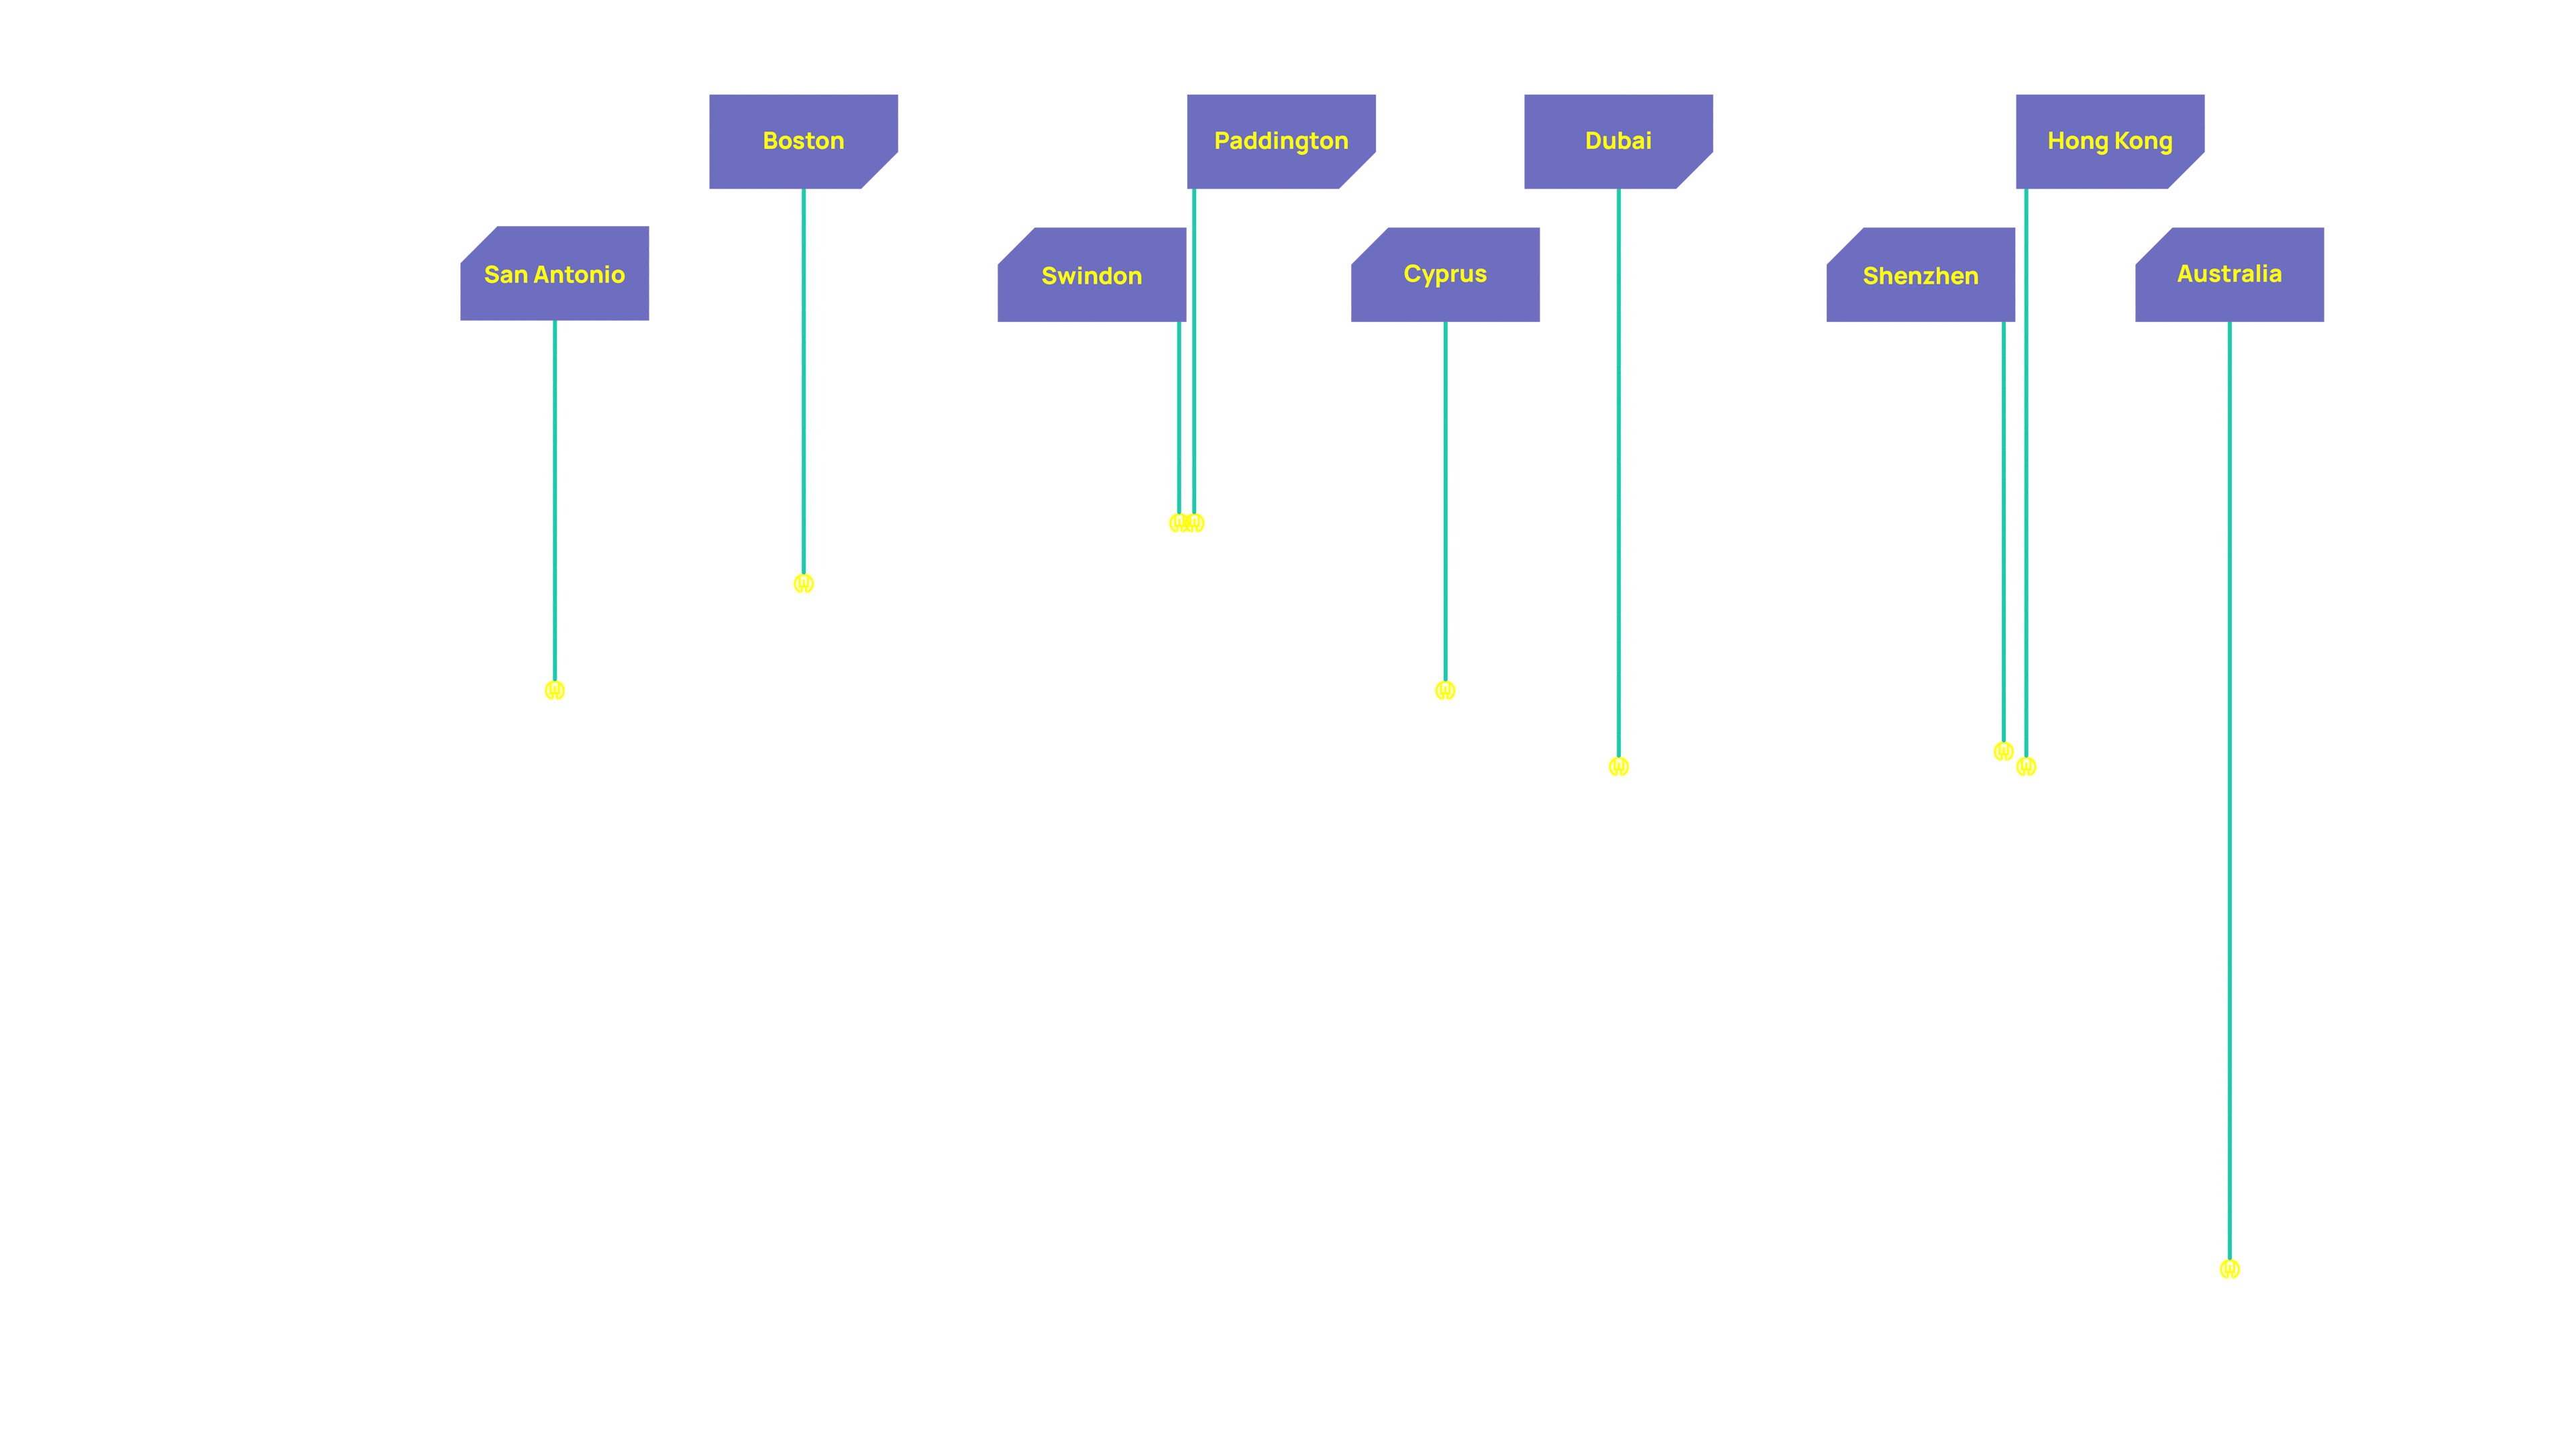 A map showing LED Studio locations: Dallas and Boston in the US, Swindon and Paddington in the UK, Cyprus, Dubai, Shenzhen, Hong Kong, and Australia.